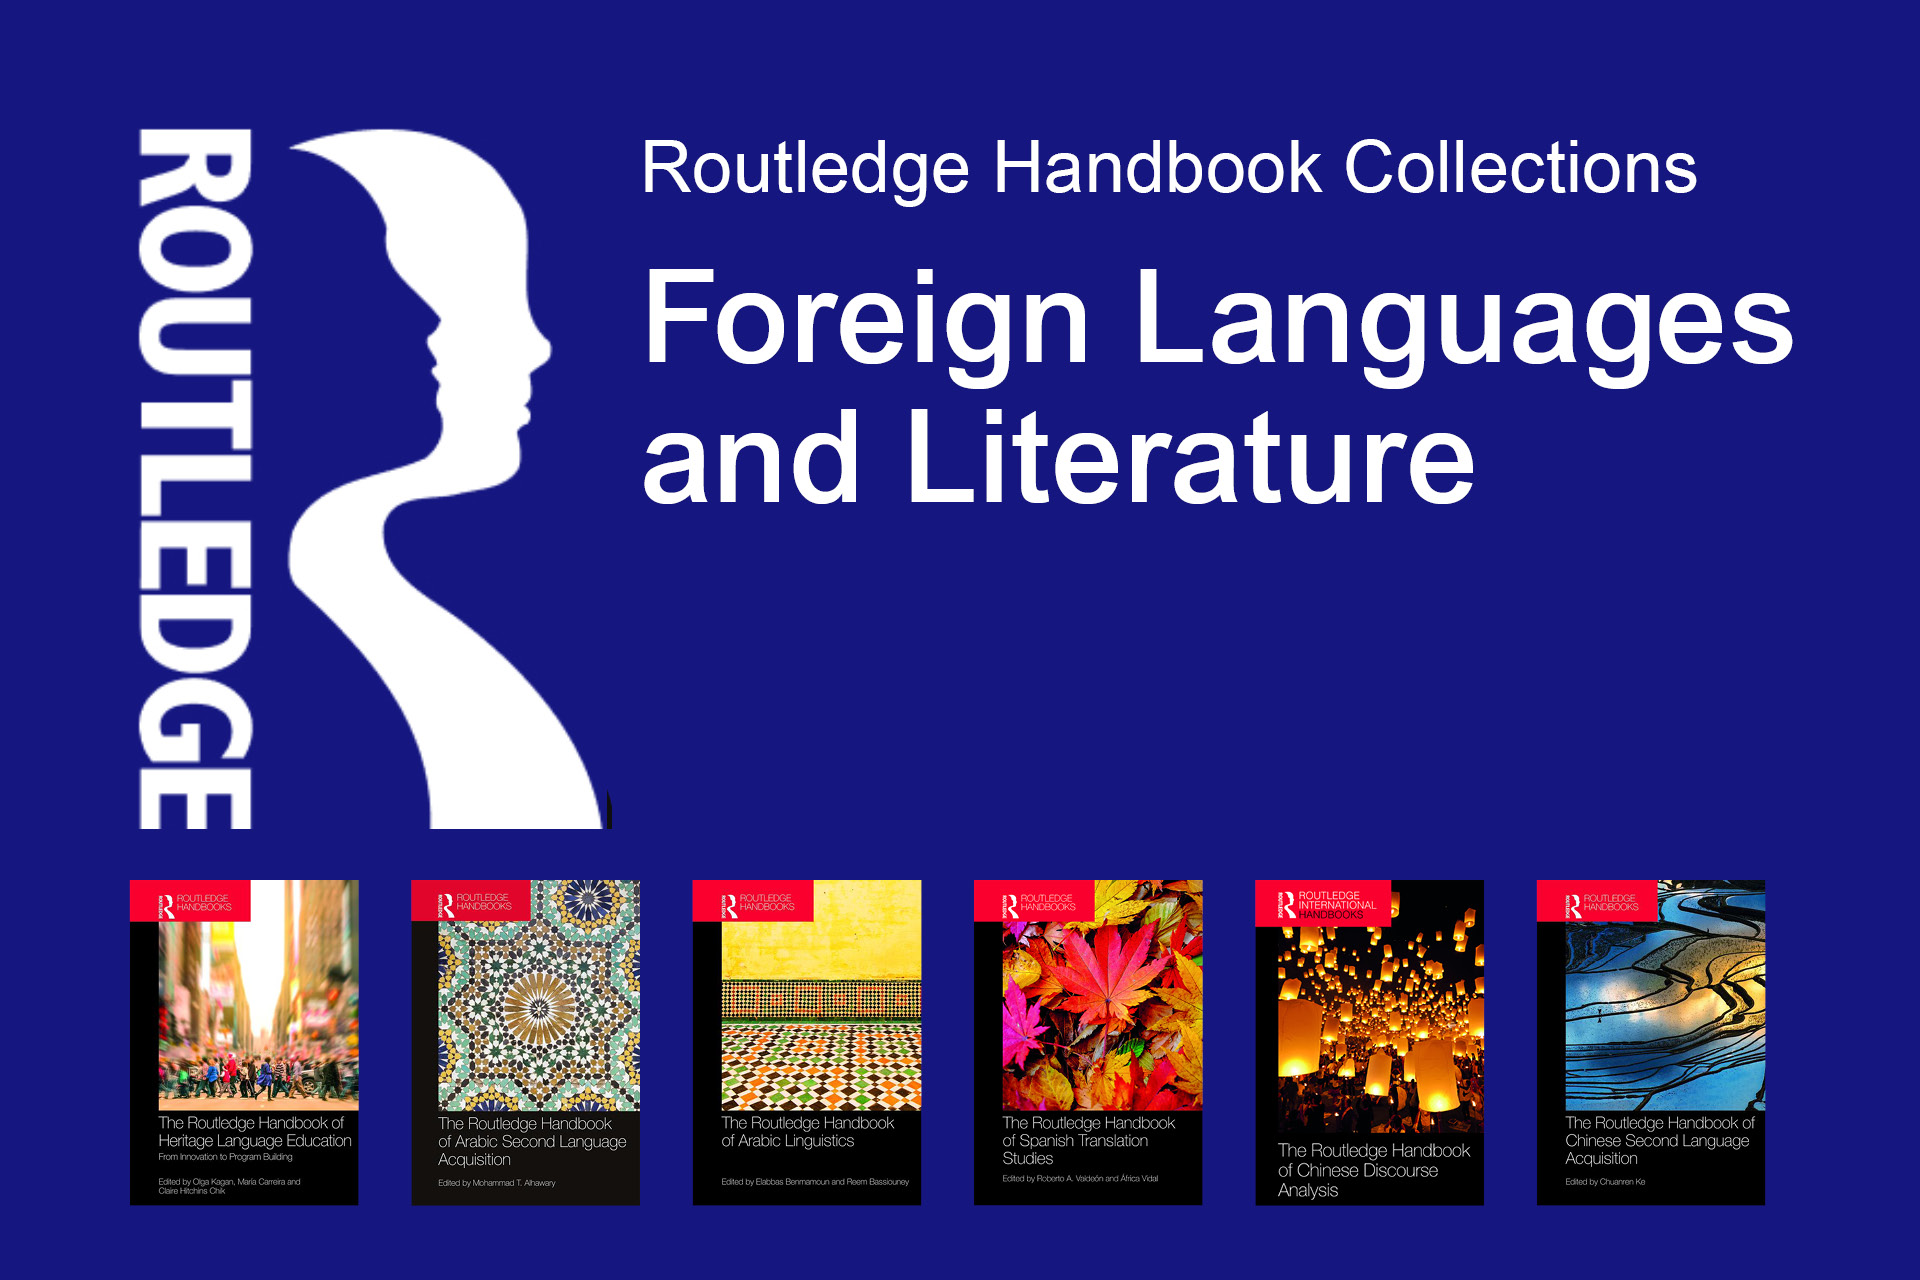 Routledge Handbooks Online: Foreign Languages and Literature book covers